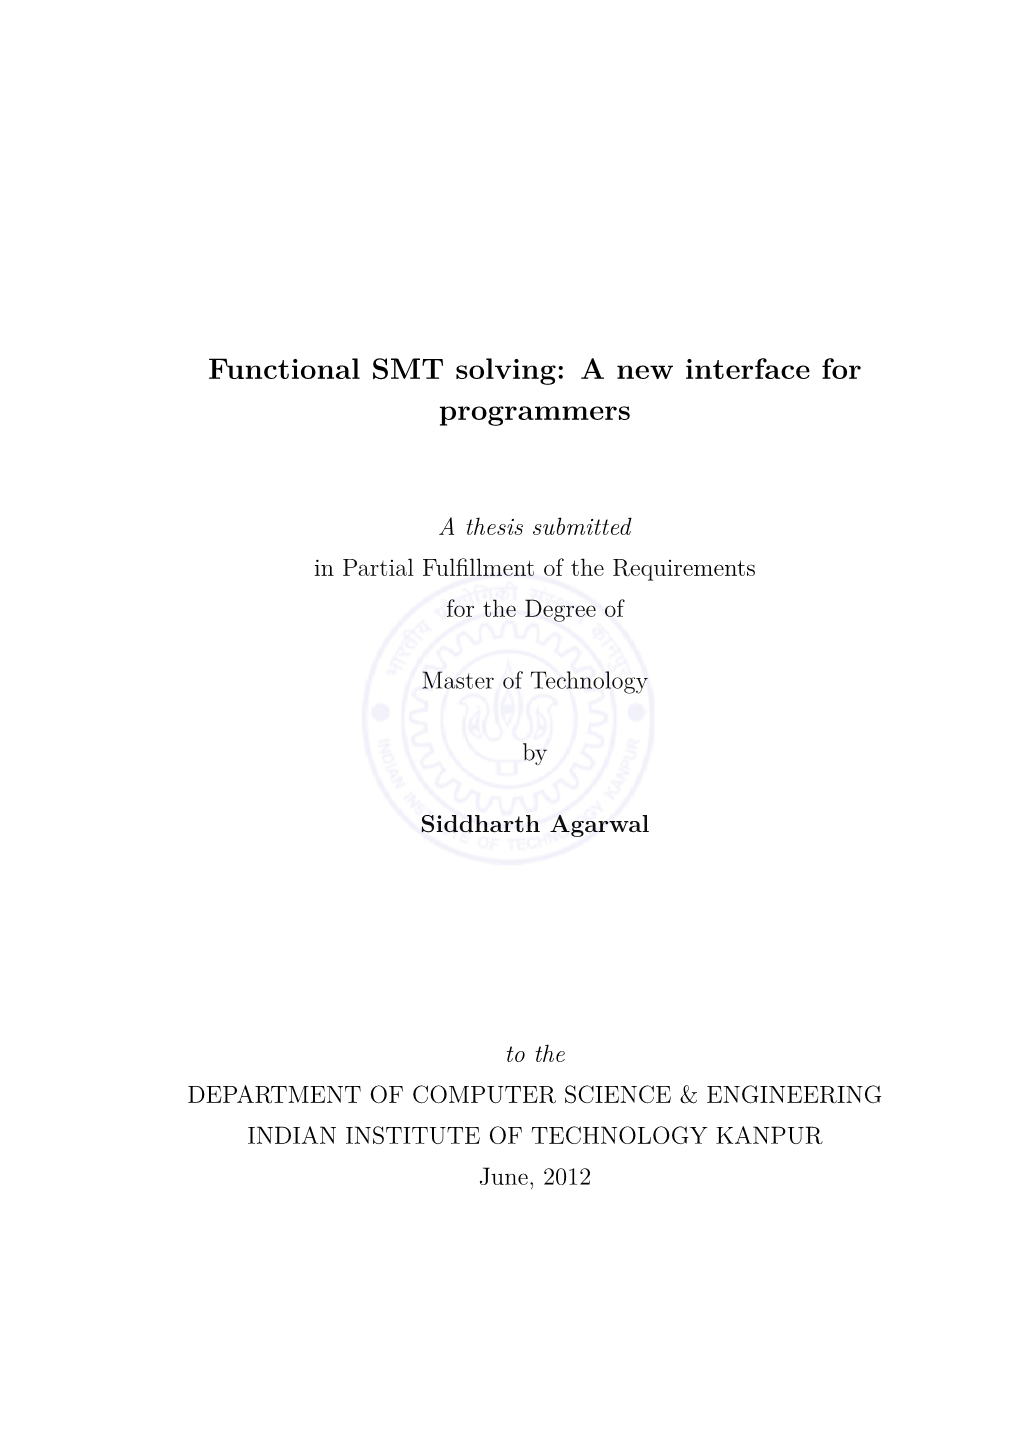 Functional SMT Solving: a New Interface for Programmers